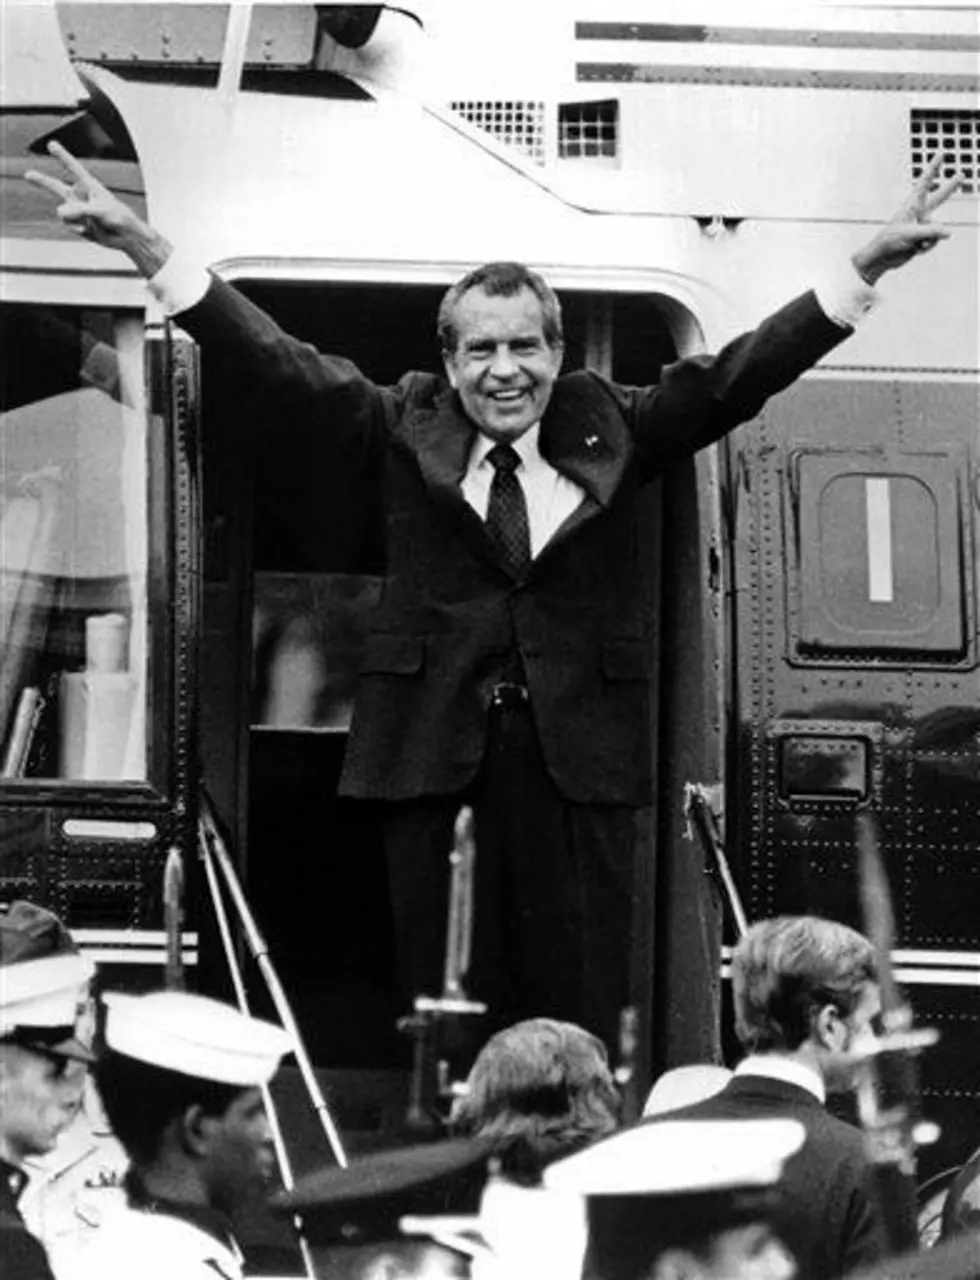 Nixon tapes released on anniversary of his resignation